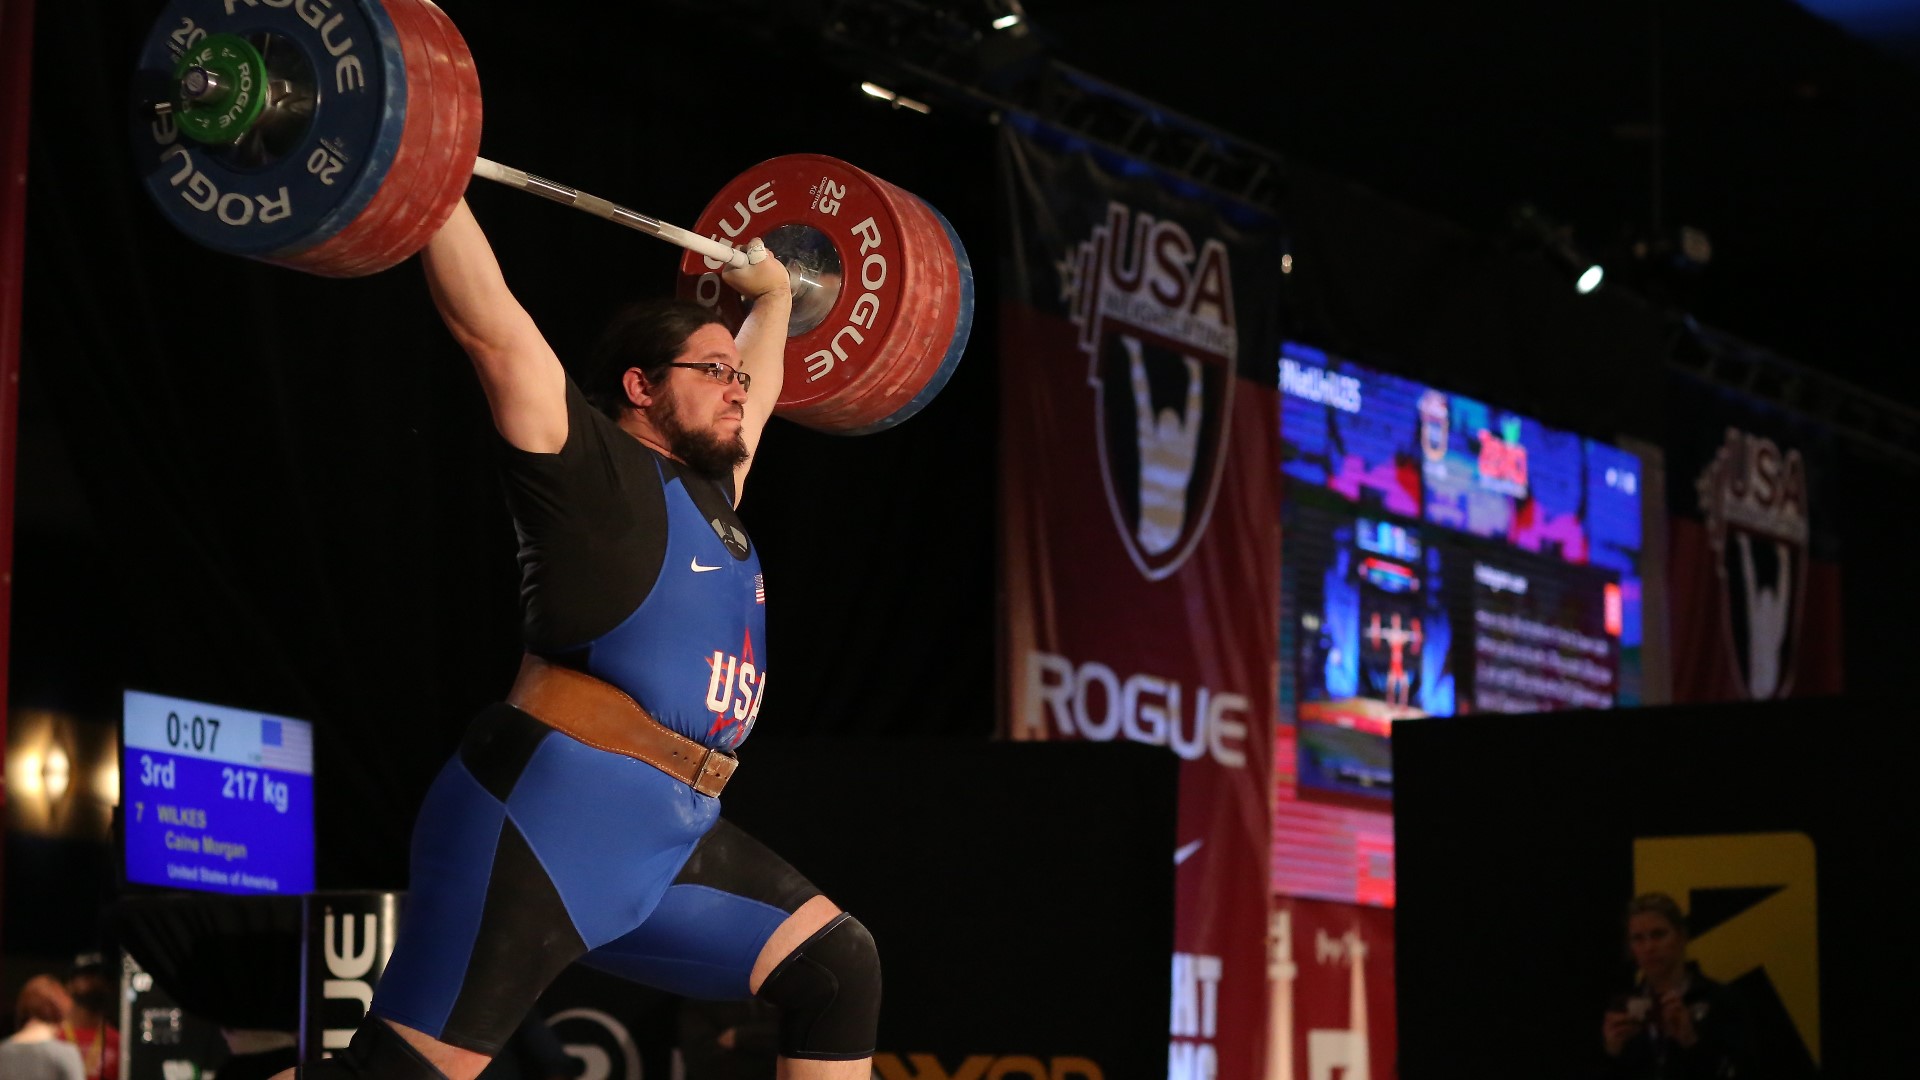 Caine Wilkes, 33, is from Matthews, North Carolina, and will be representing Team USA in the Tokyo Olympics. Wilkes will compete in Weightlifting.